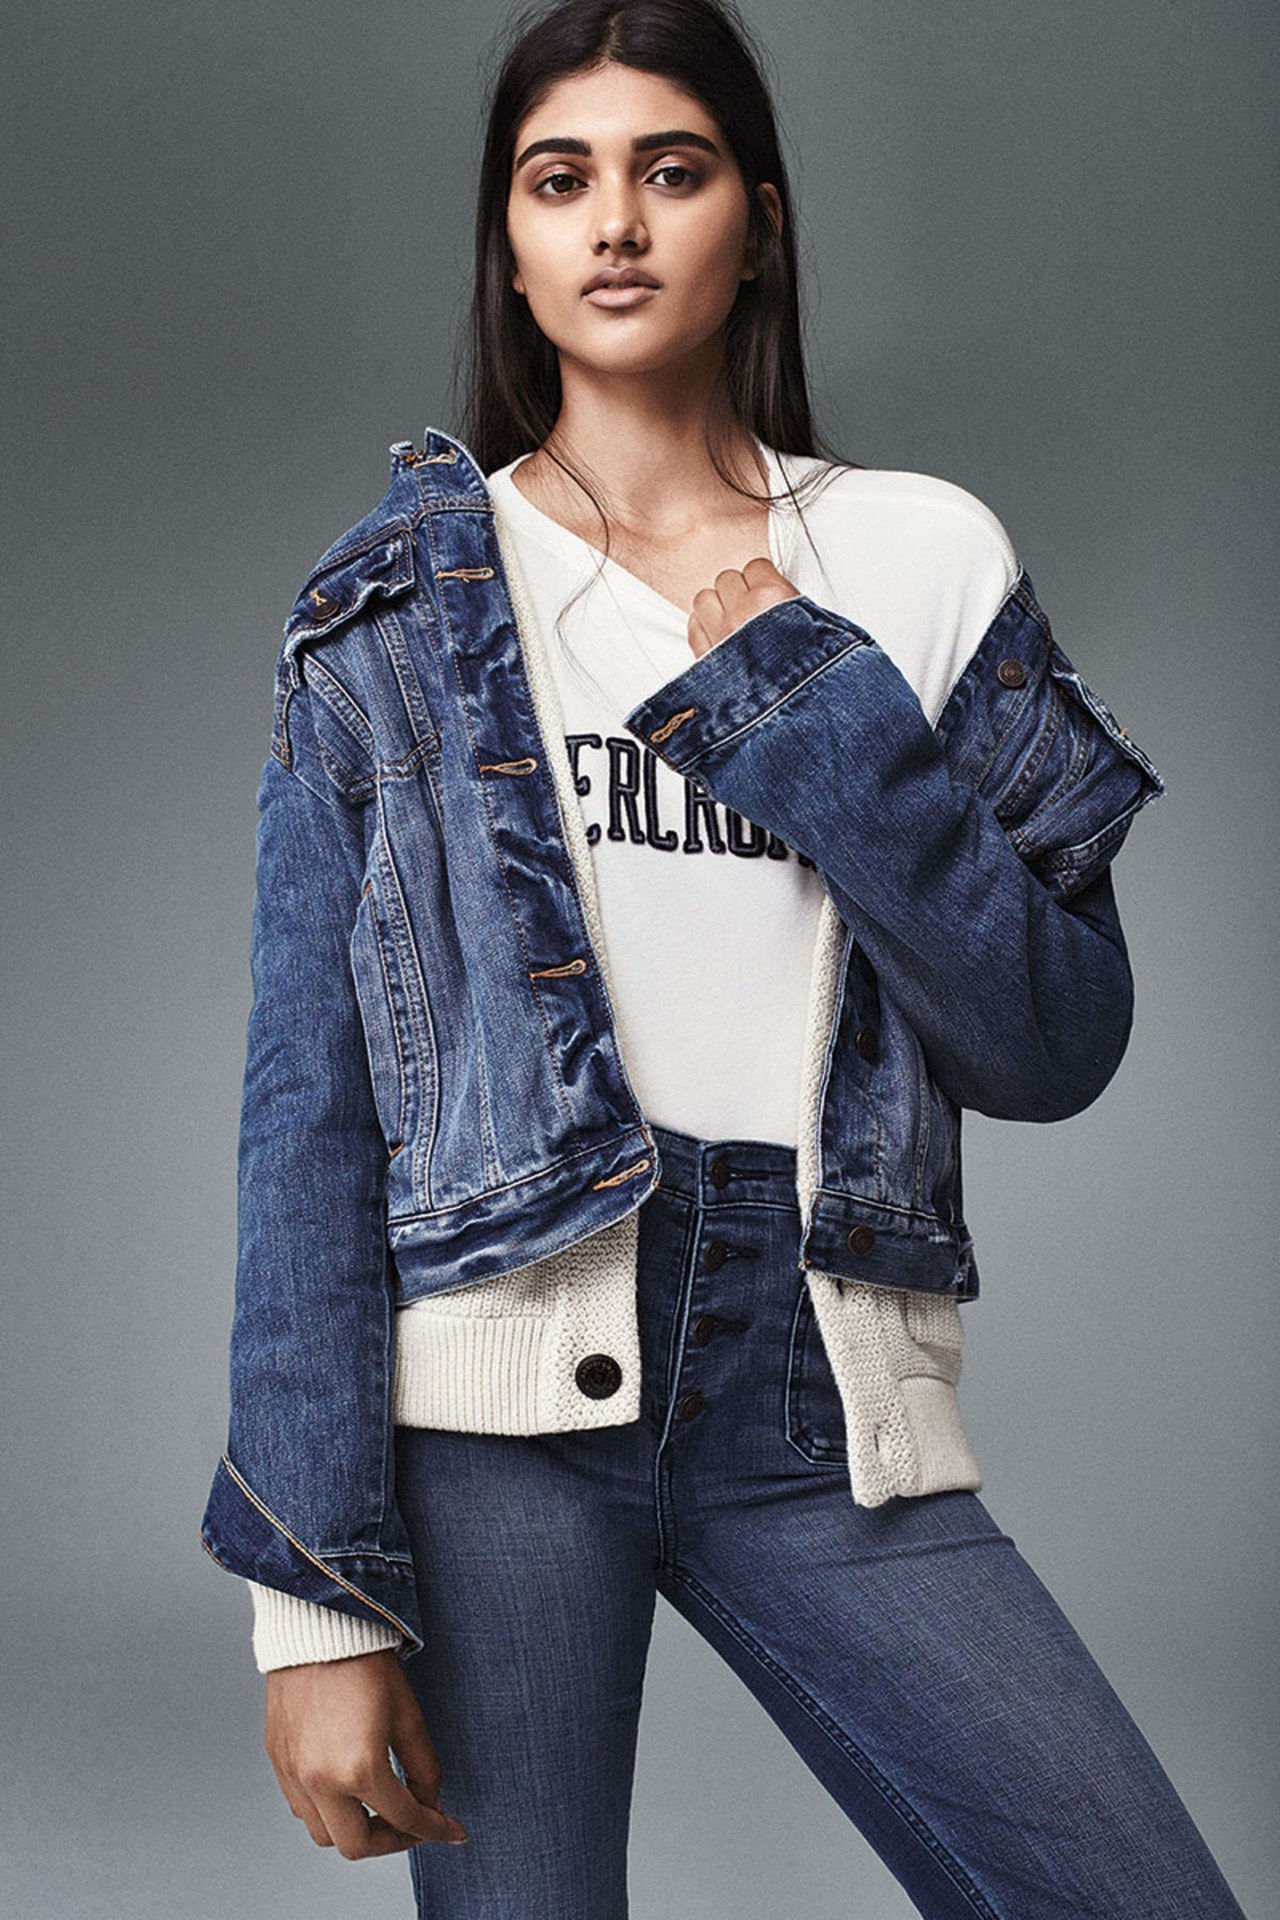 Neu abercrombie fitch campaign picture neelam gill jean jacket